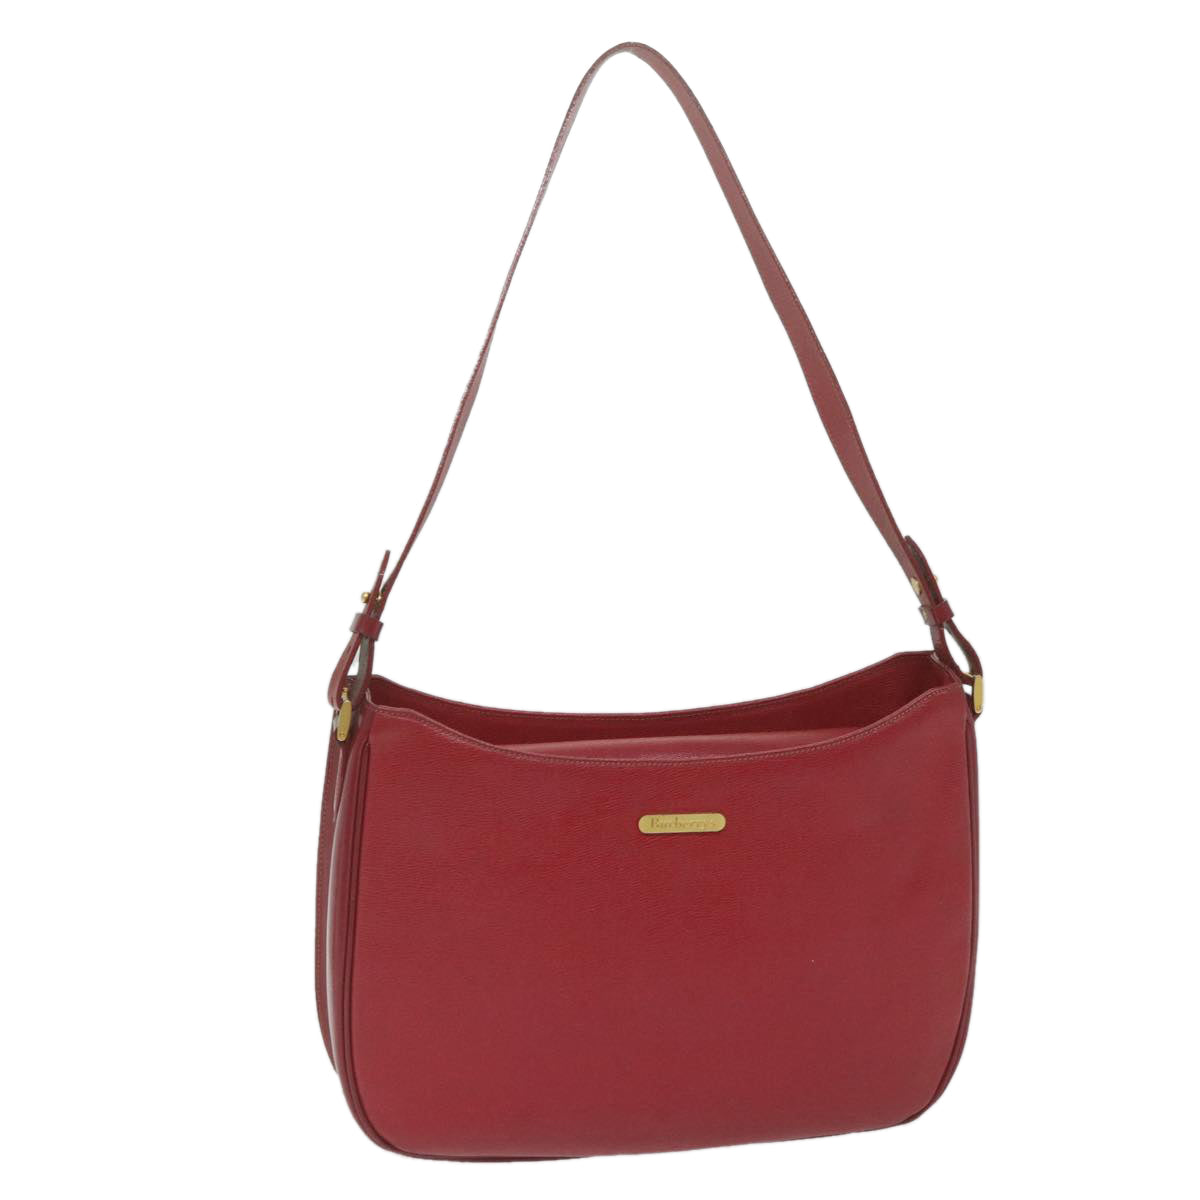 Burberrys Shoulder Bag Leather Red Auth bs10914